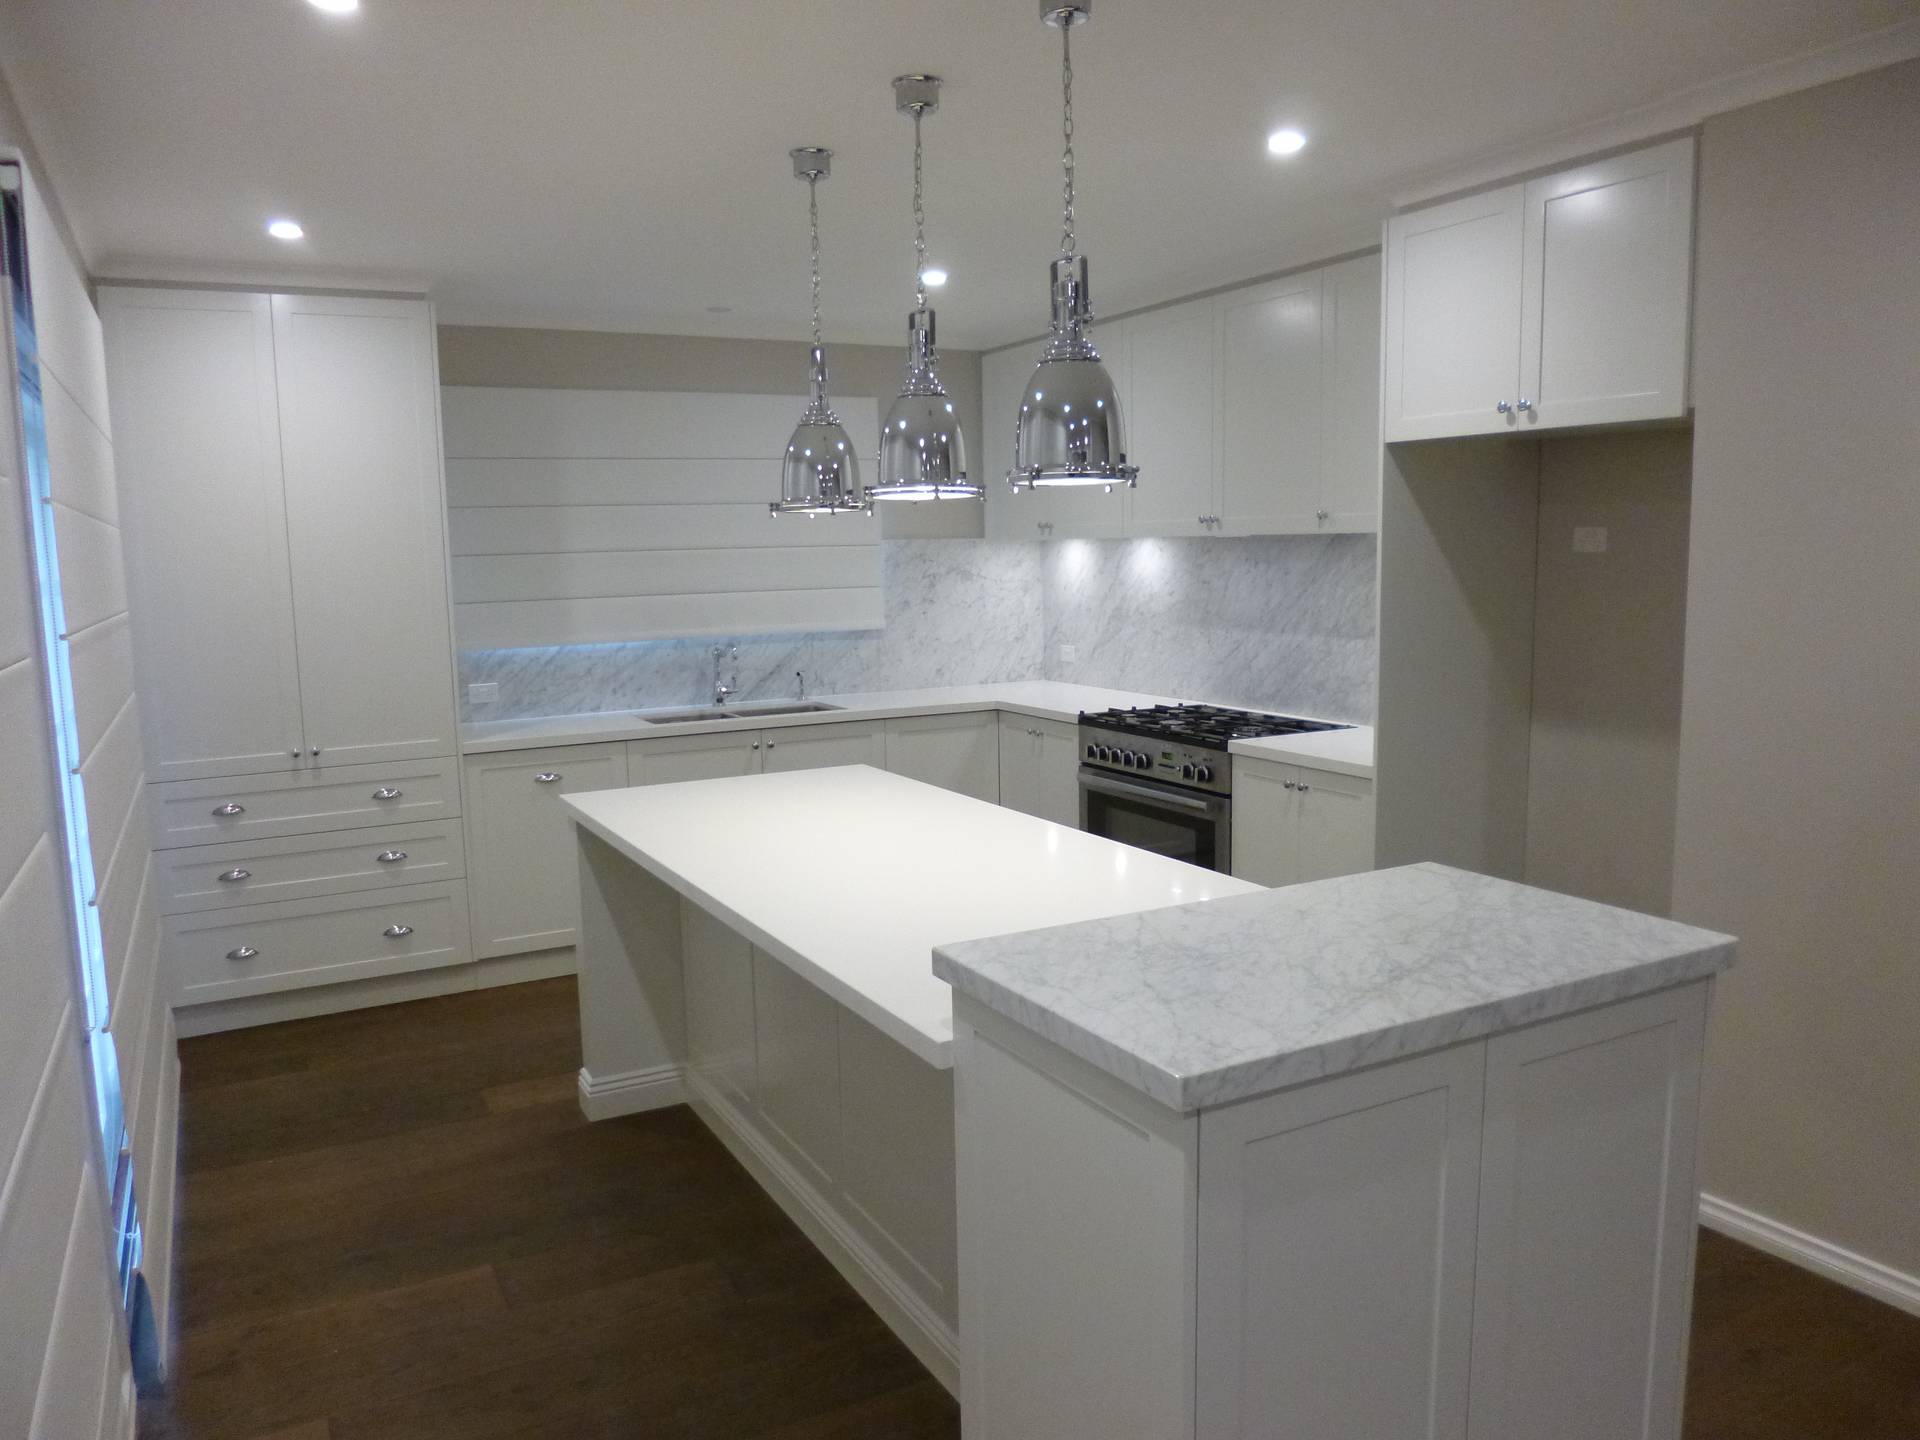 Hampton style kitchen, timber floors and industrial style pendant lights creating a stunning kitchen.